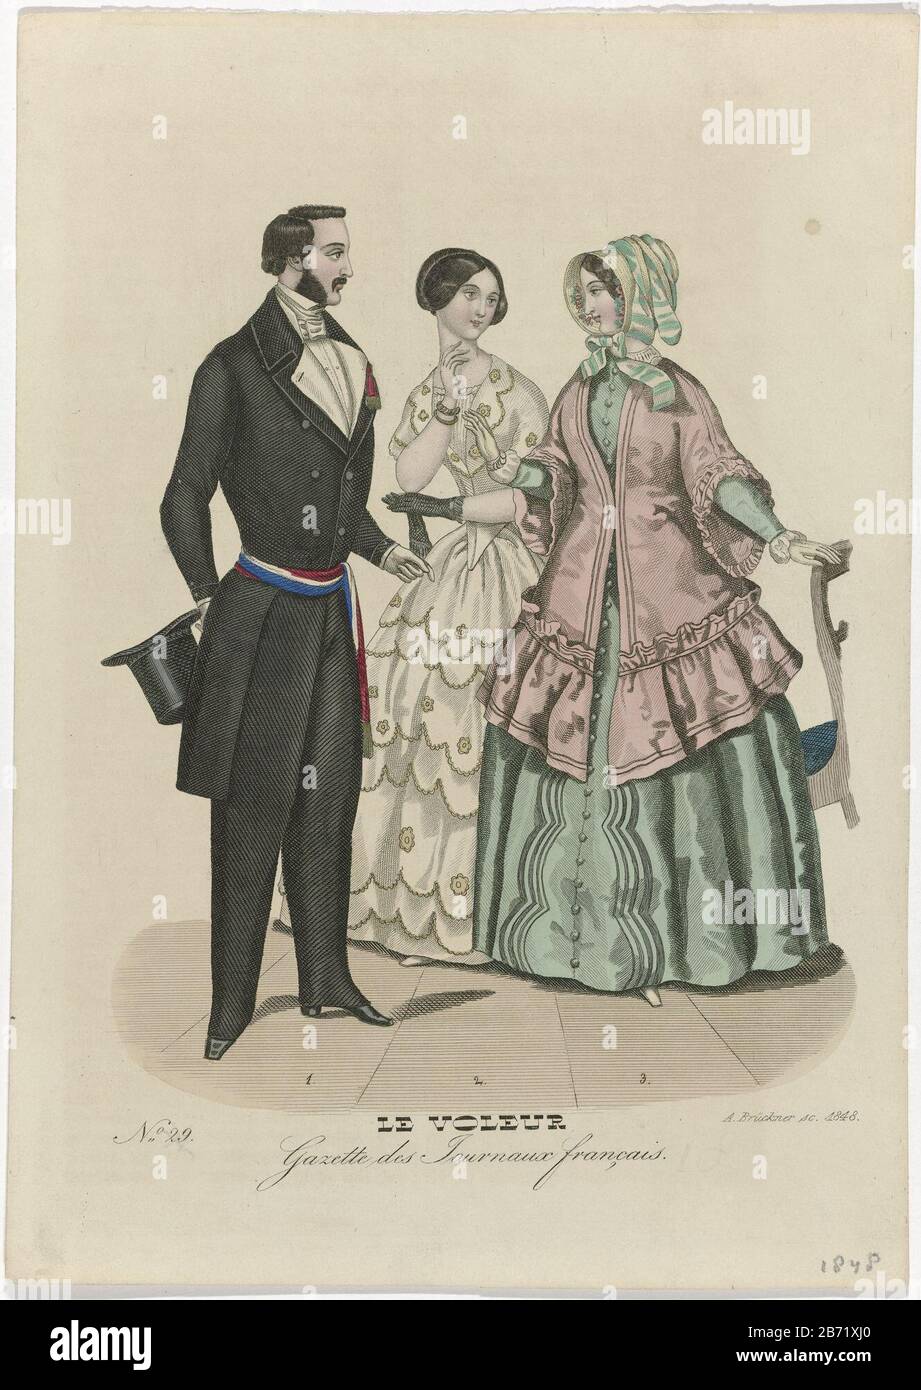 A man and two women, one numbered to three. 1: jacket, waistcoat and  trousers. Knotted cravat. Tall hat. Striped sash in red, white and blue  with fringe at the ends. Shoes with